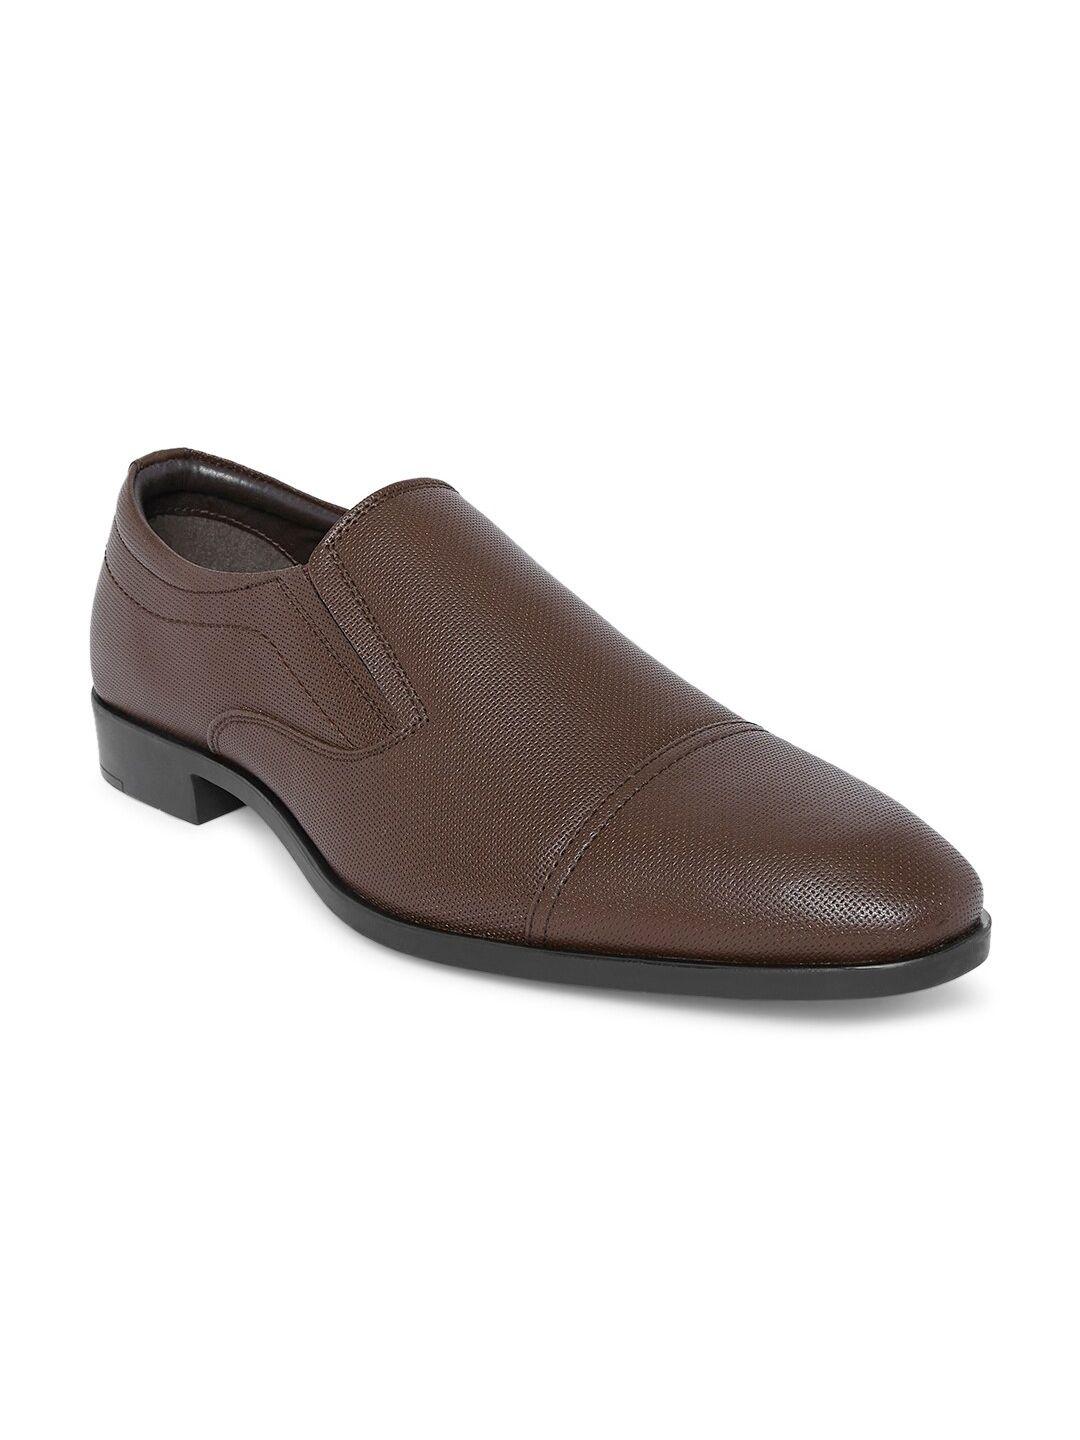 byford by pantaloons men textured formal slip-on shoes